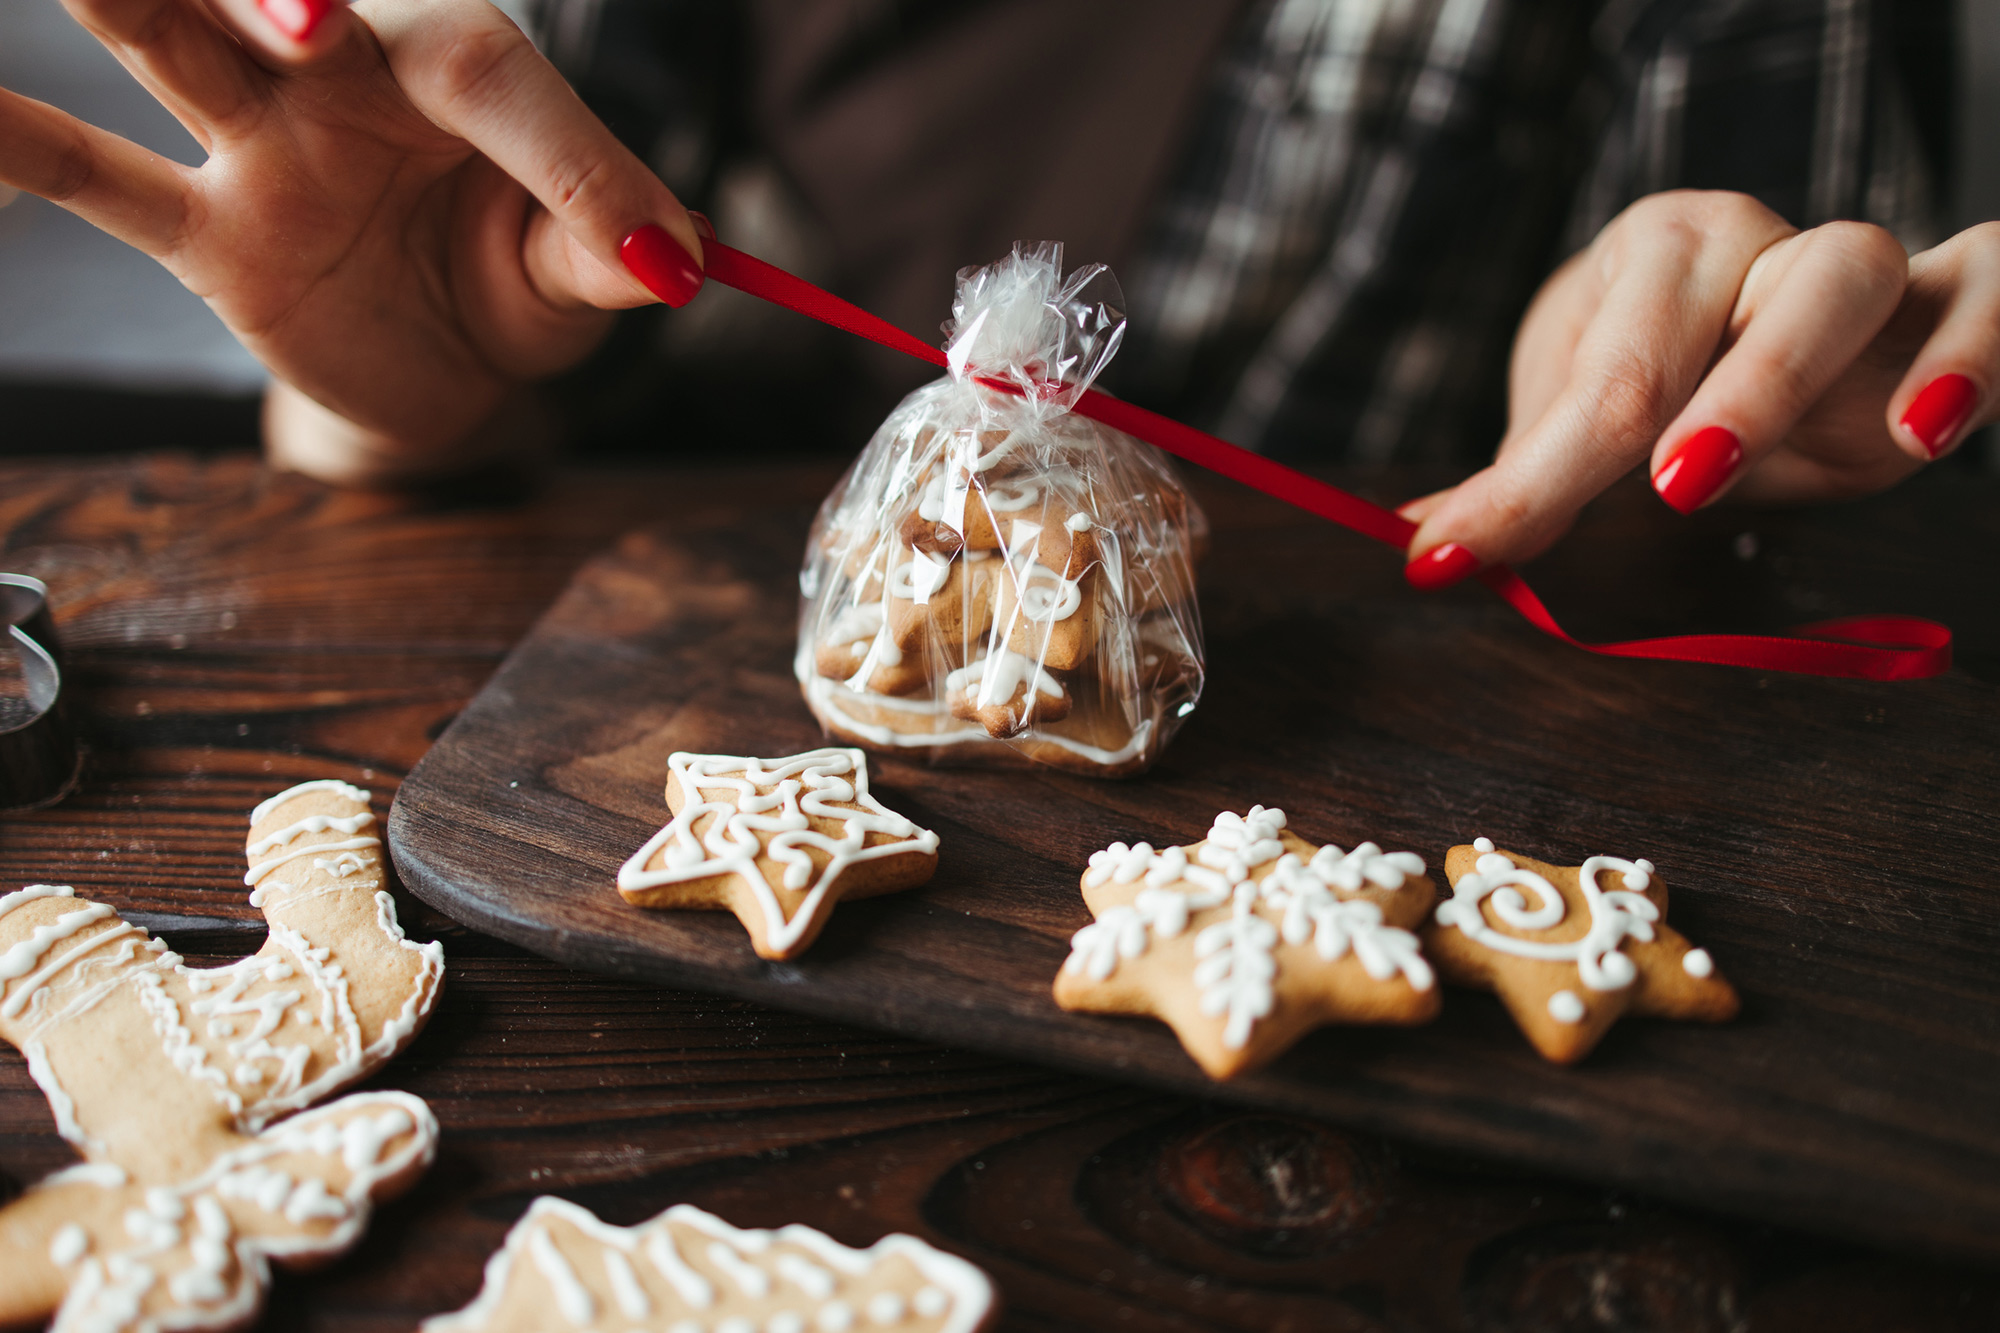 Deliver some homemade holiday treats to someone unexpected.